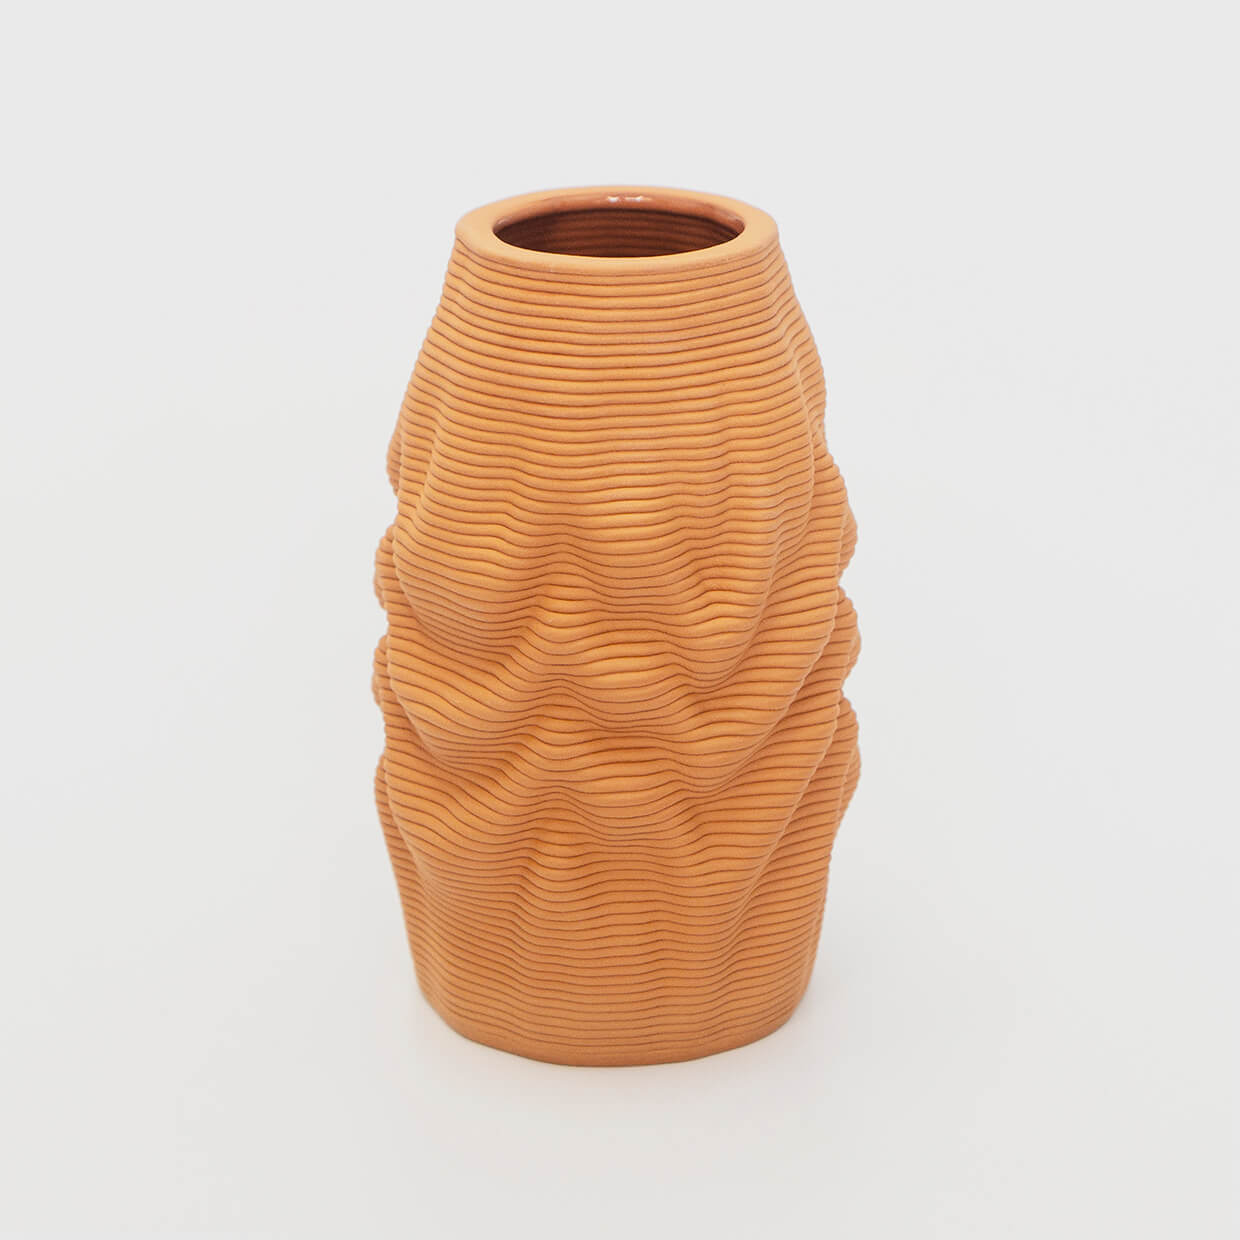 
                  
                    The tough stoneware body embodies the illusion of a soft, melting object, inviting viewers to contemplate the interplay between solidity and fluidity. The natural clay material exudes a warm and earthy aesthetic, further enhancing its organic appeal.
                  
                